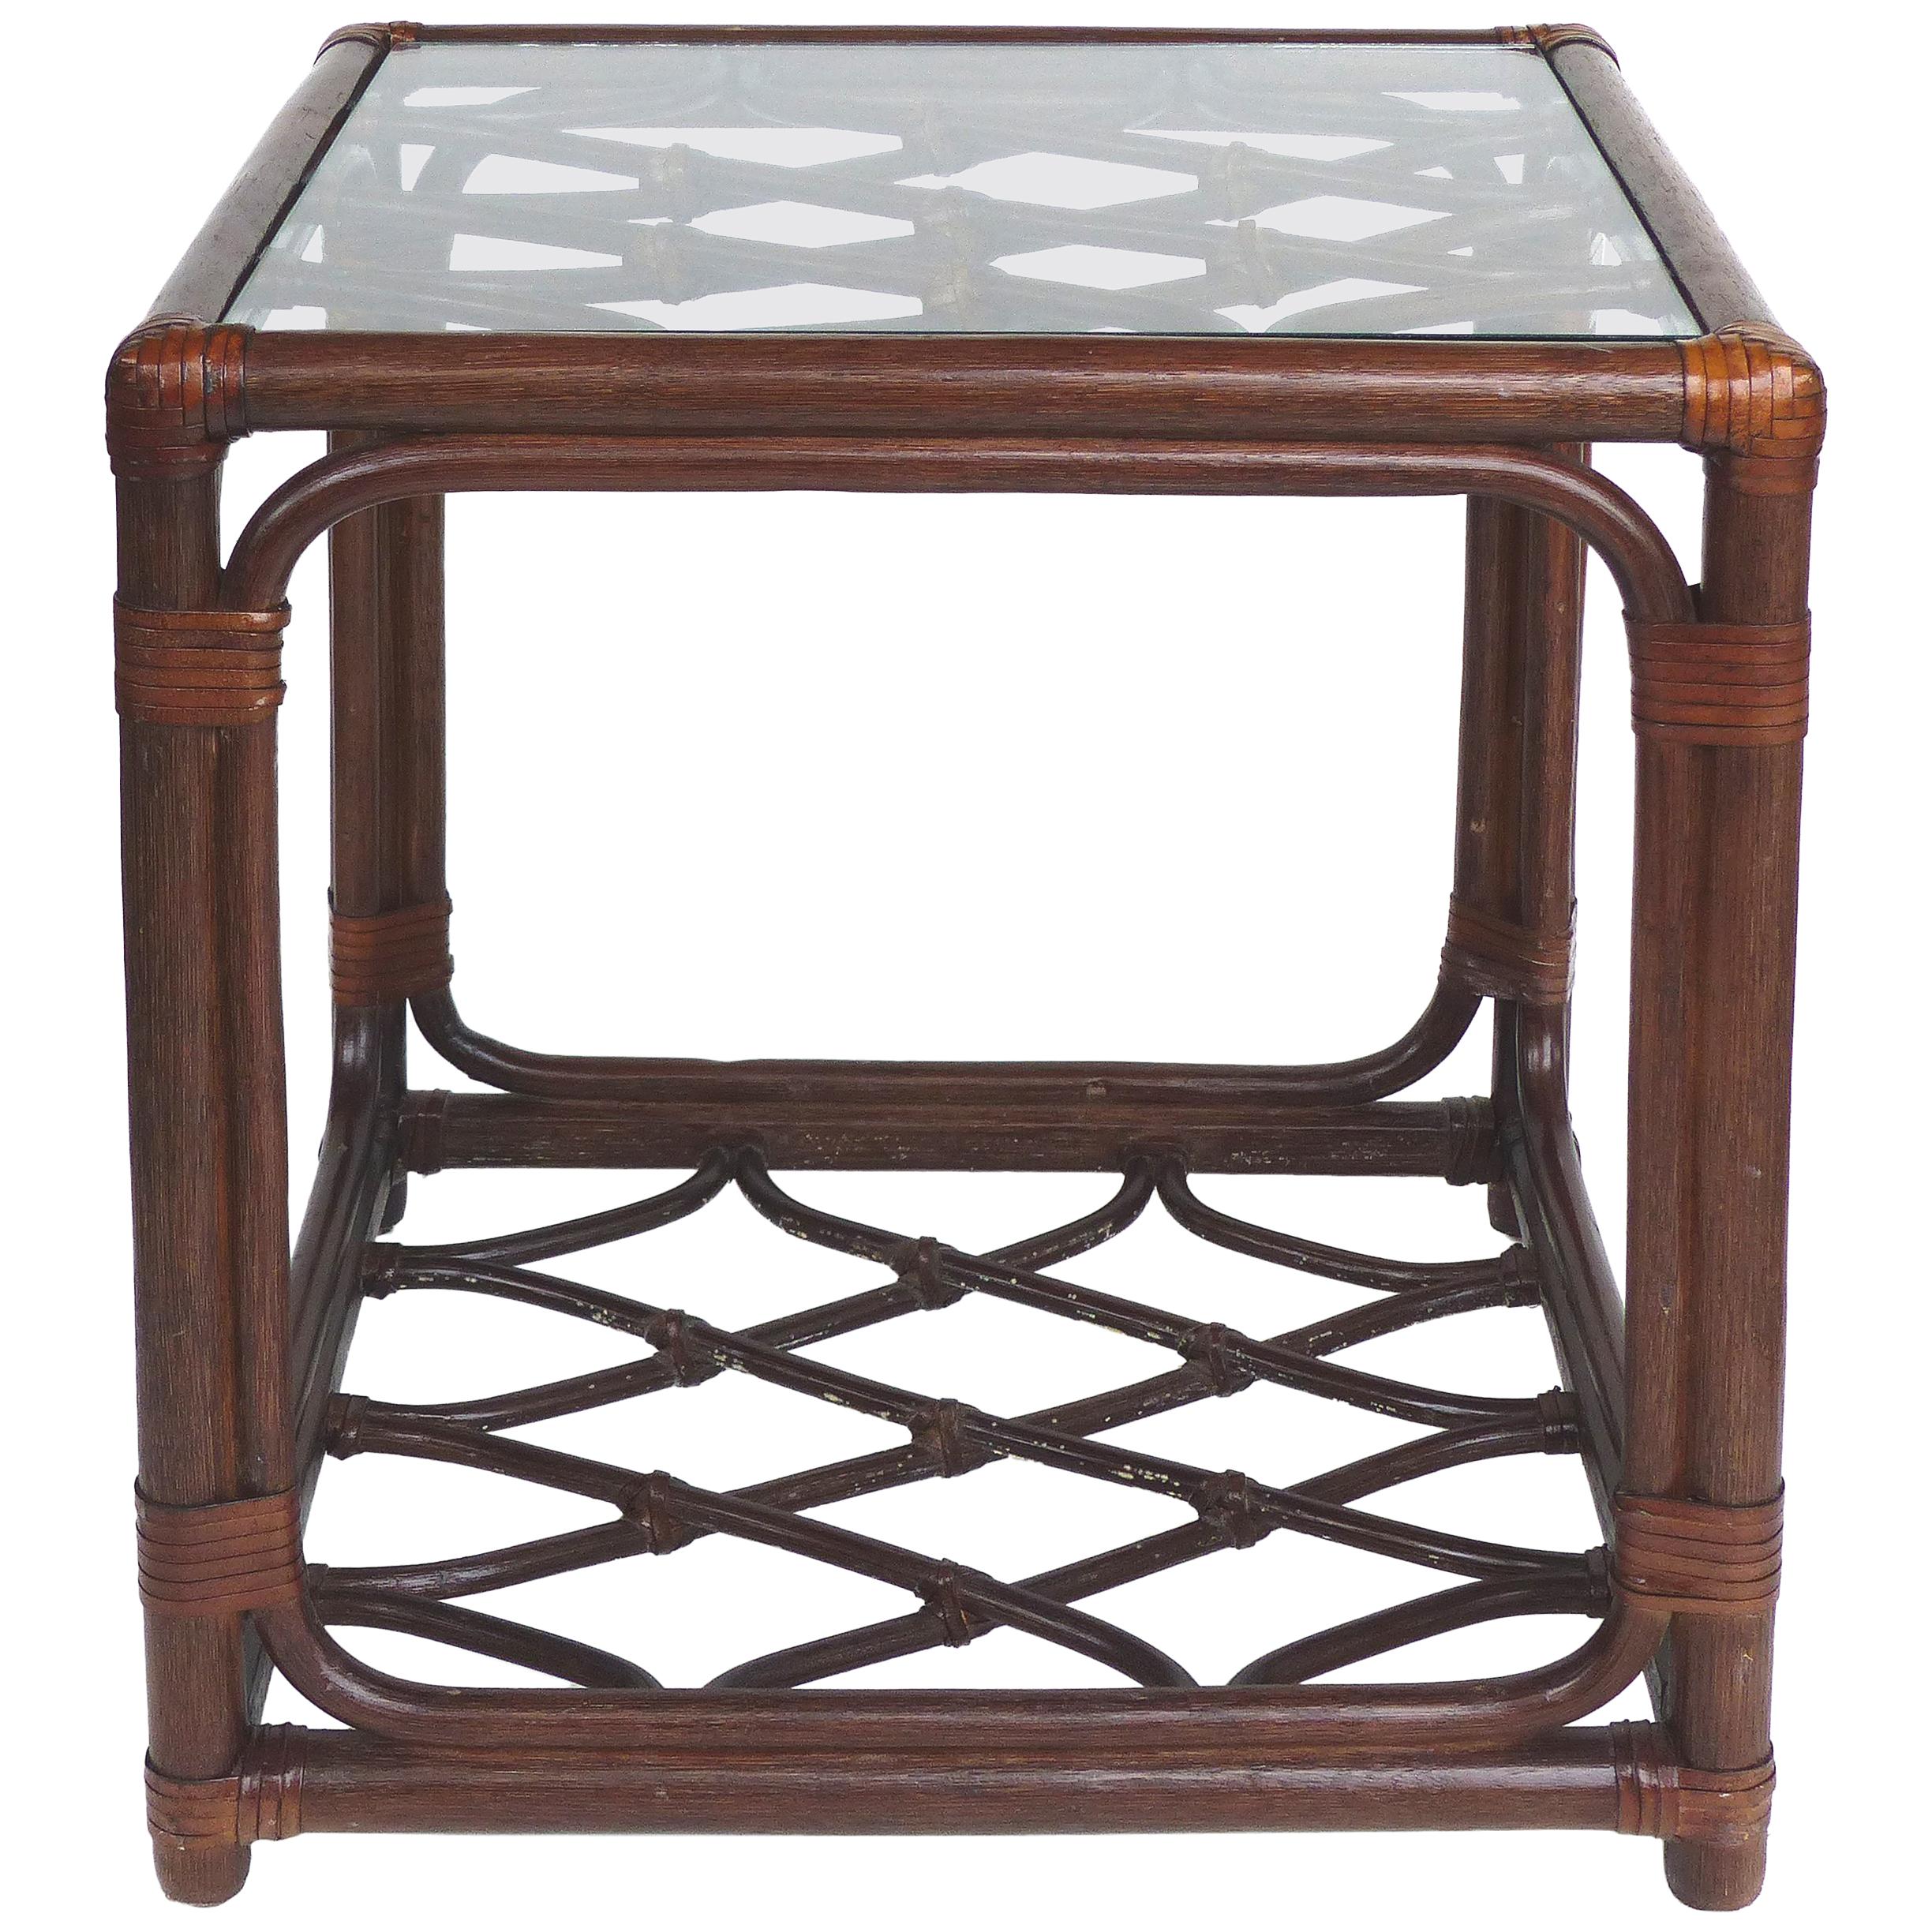 Rattan Side Table, Criss Cross Design, Leather Strapping attributed to McGuire